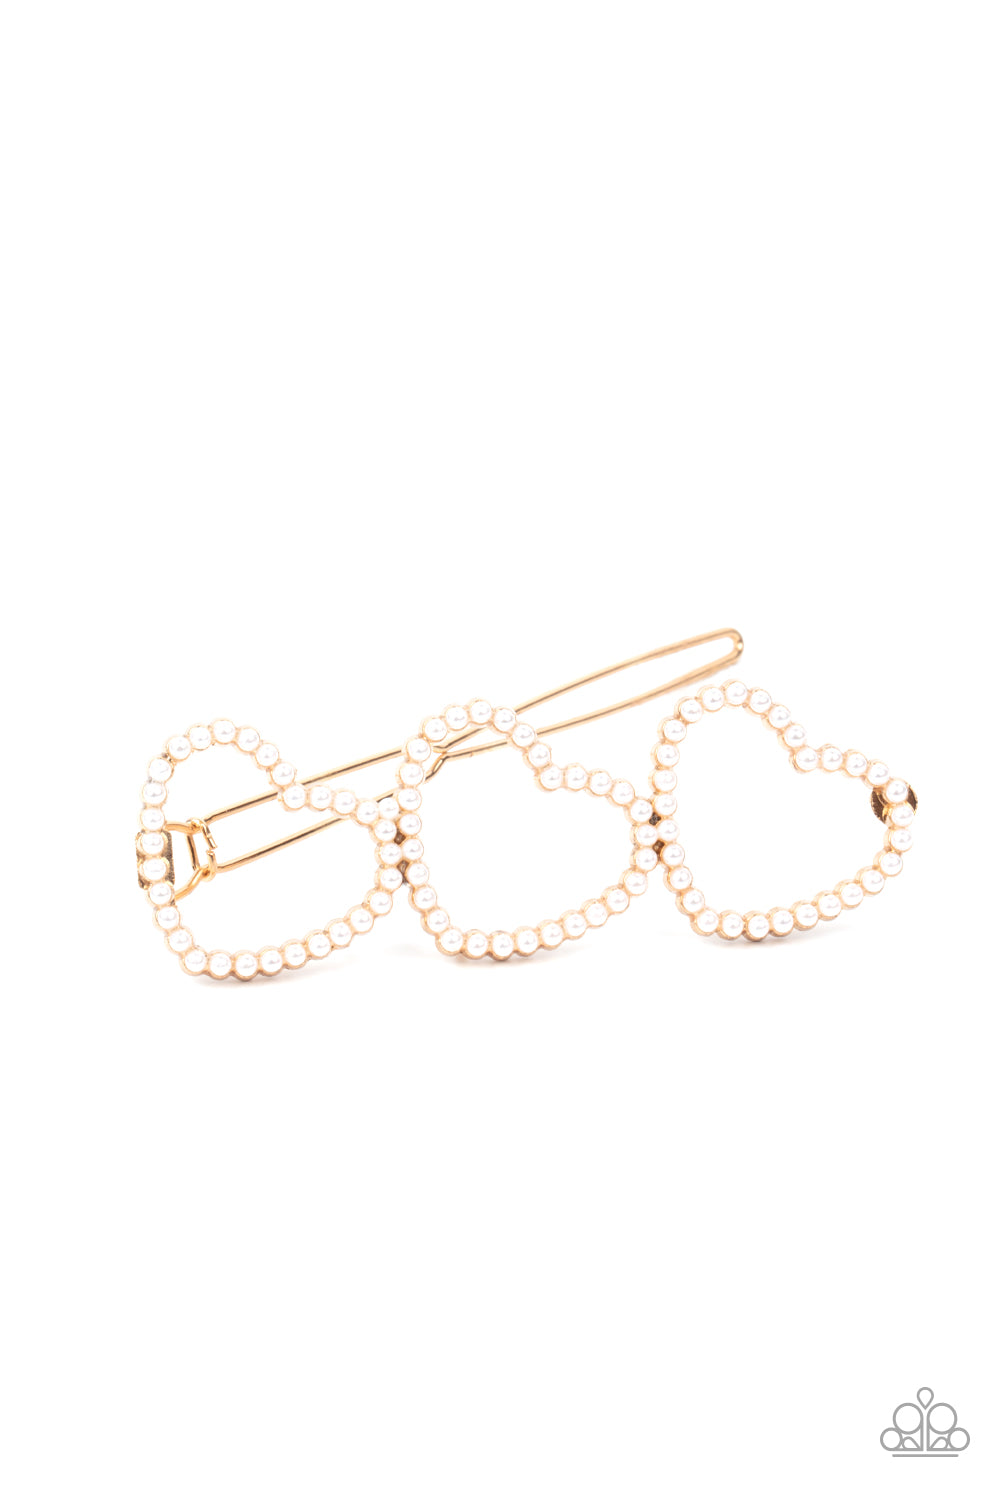 Love Struck Gold Hair Clip - Paparazzi Accessories  Dainty white pearls adorn a trio of gold heart silhouette frames, creating a romantic display. Features a clamp barrette closure.  Sold as one individual barrette.